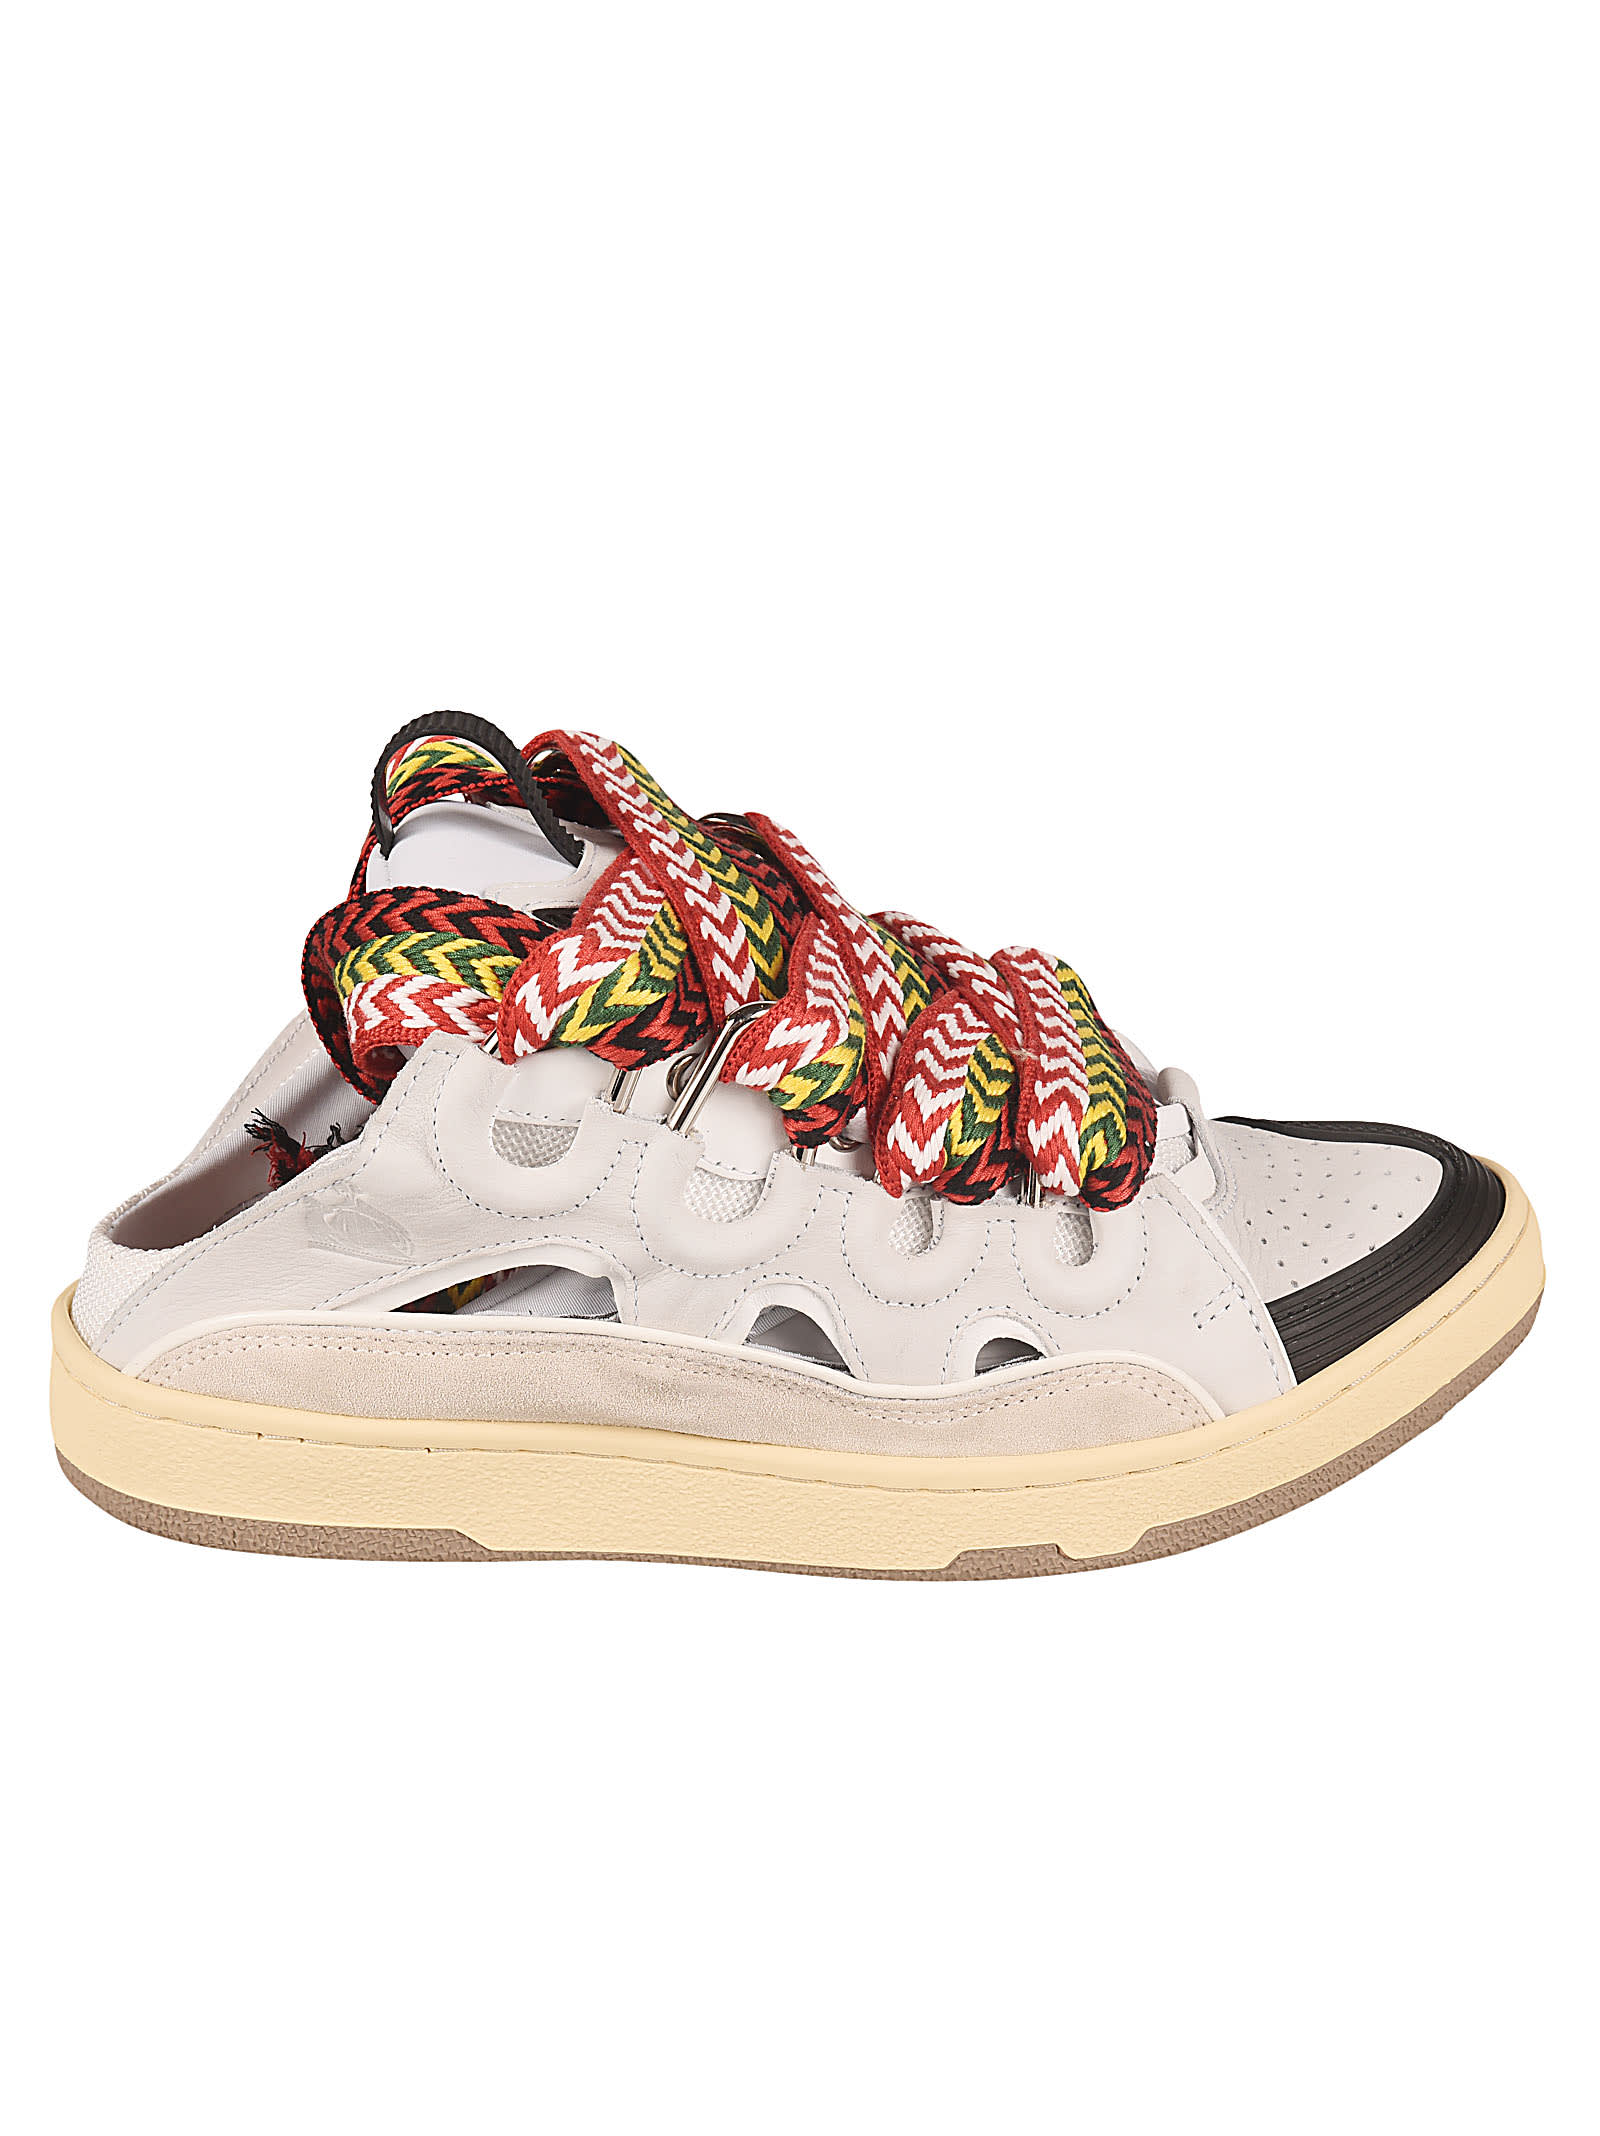 Lanvin Semi-exposed Back Lace-up Sneakers